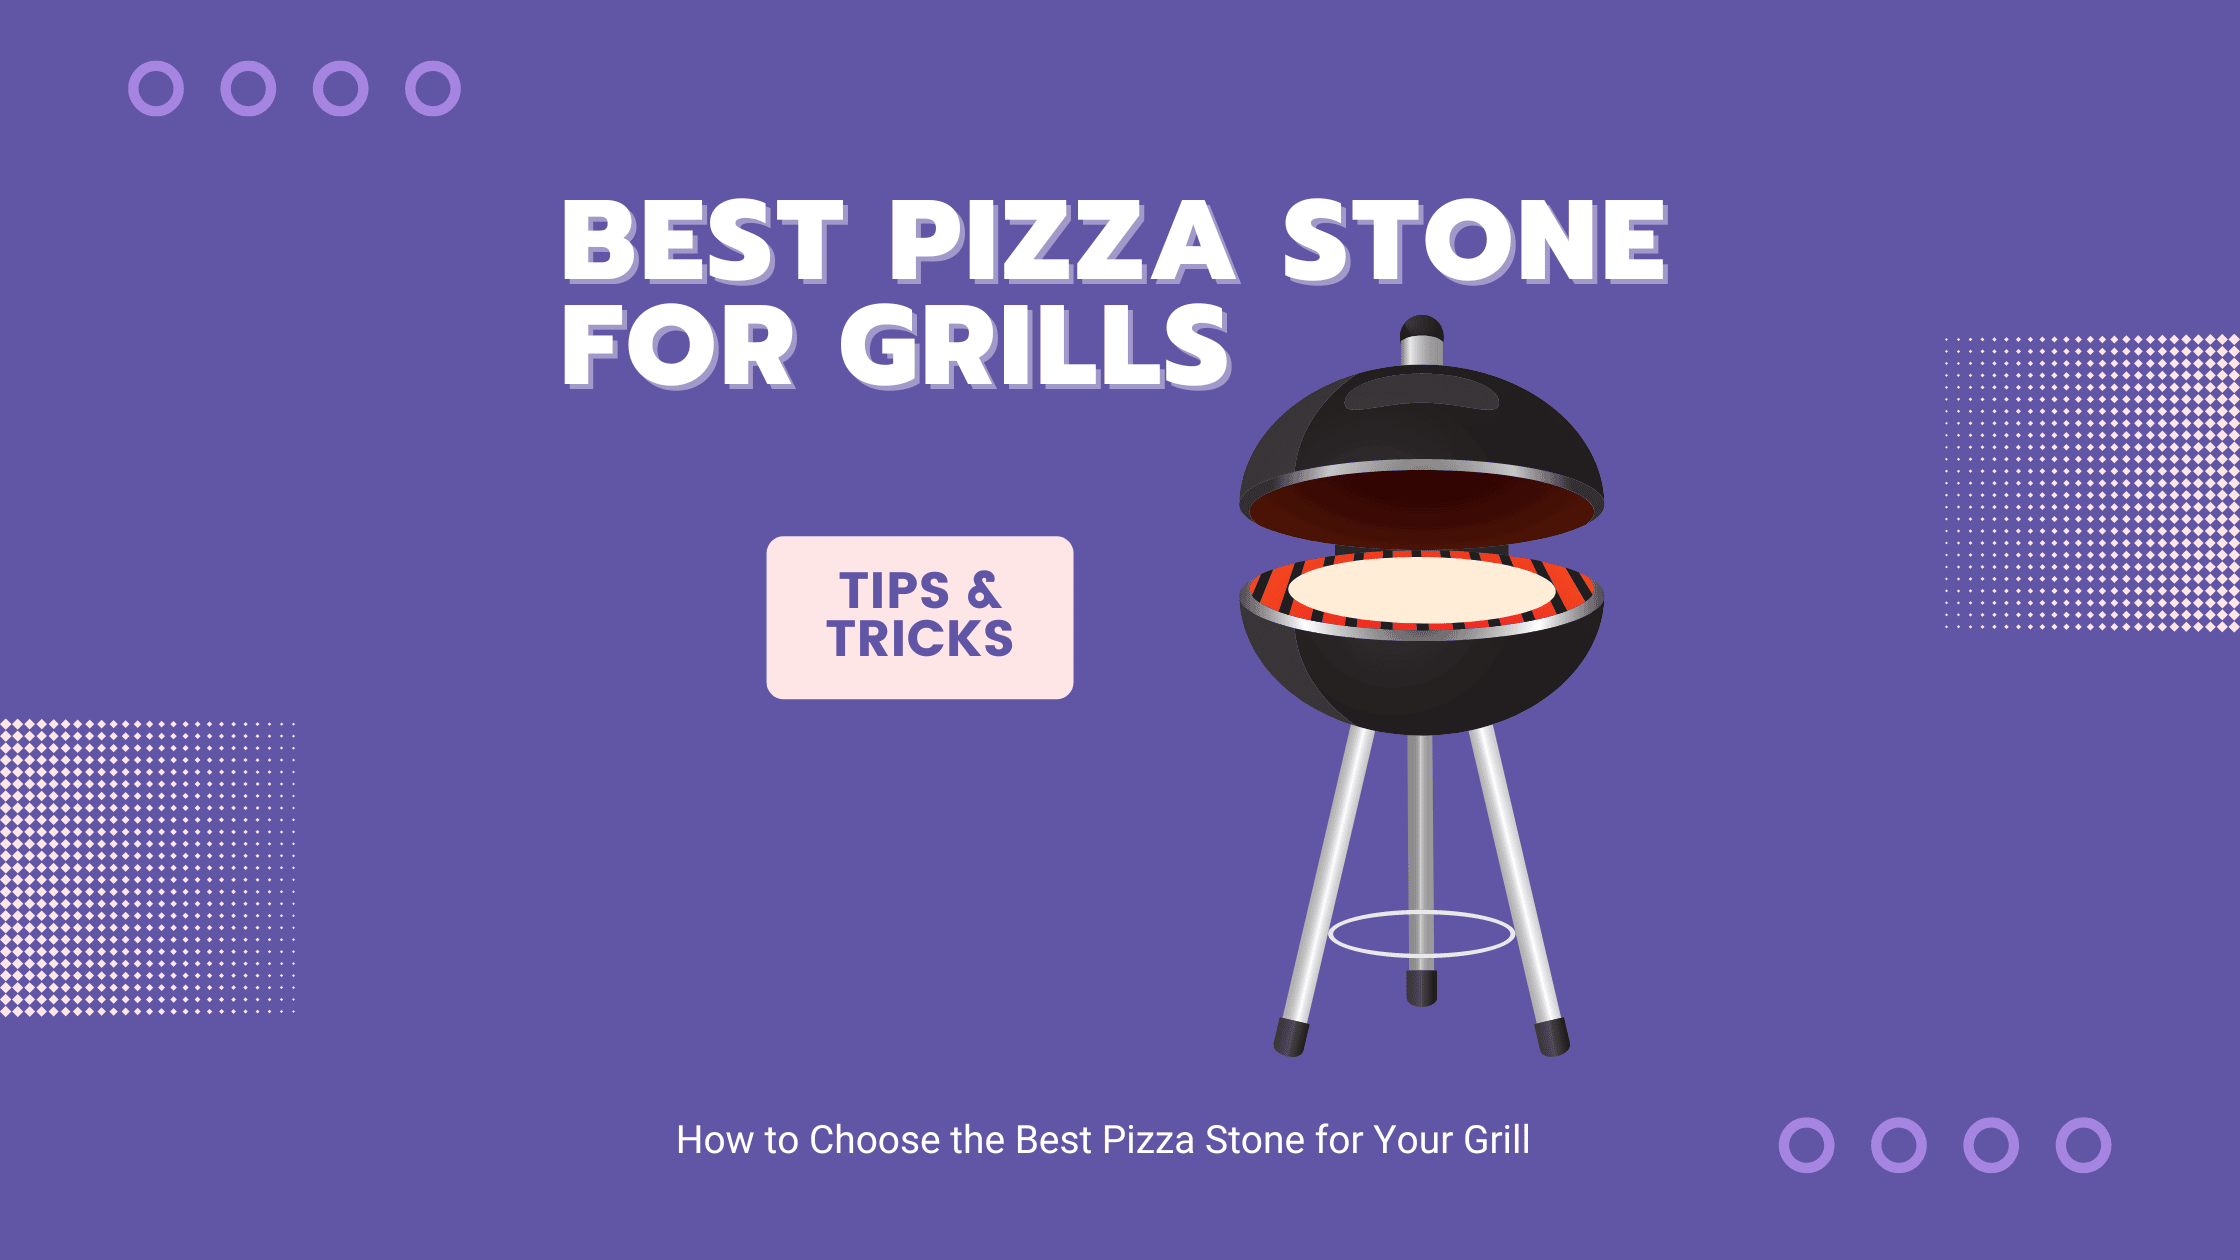 Best Pizza Stones for Grills in 2022